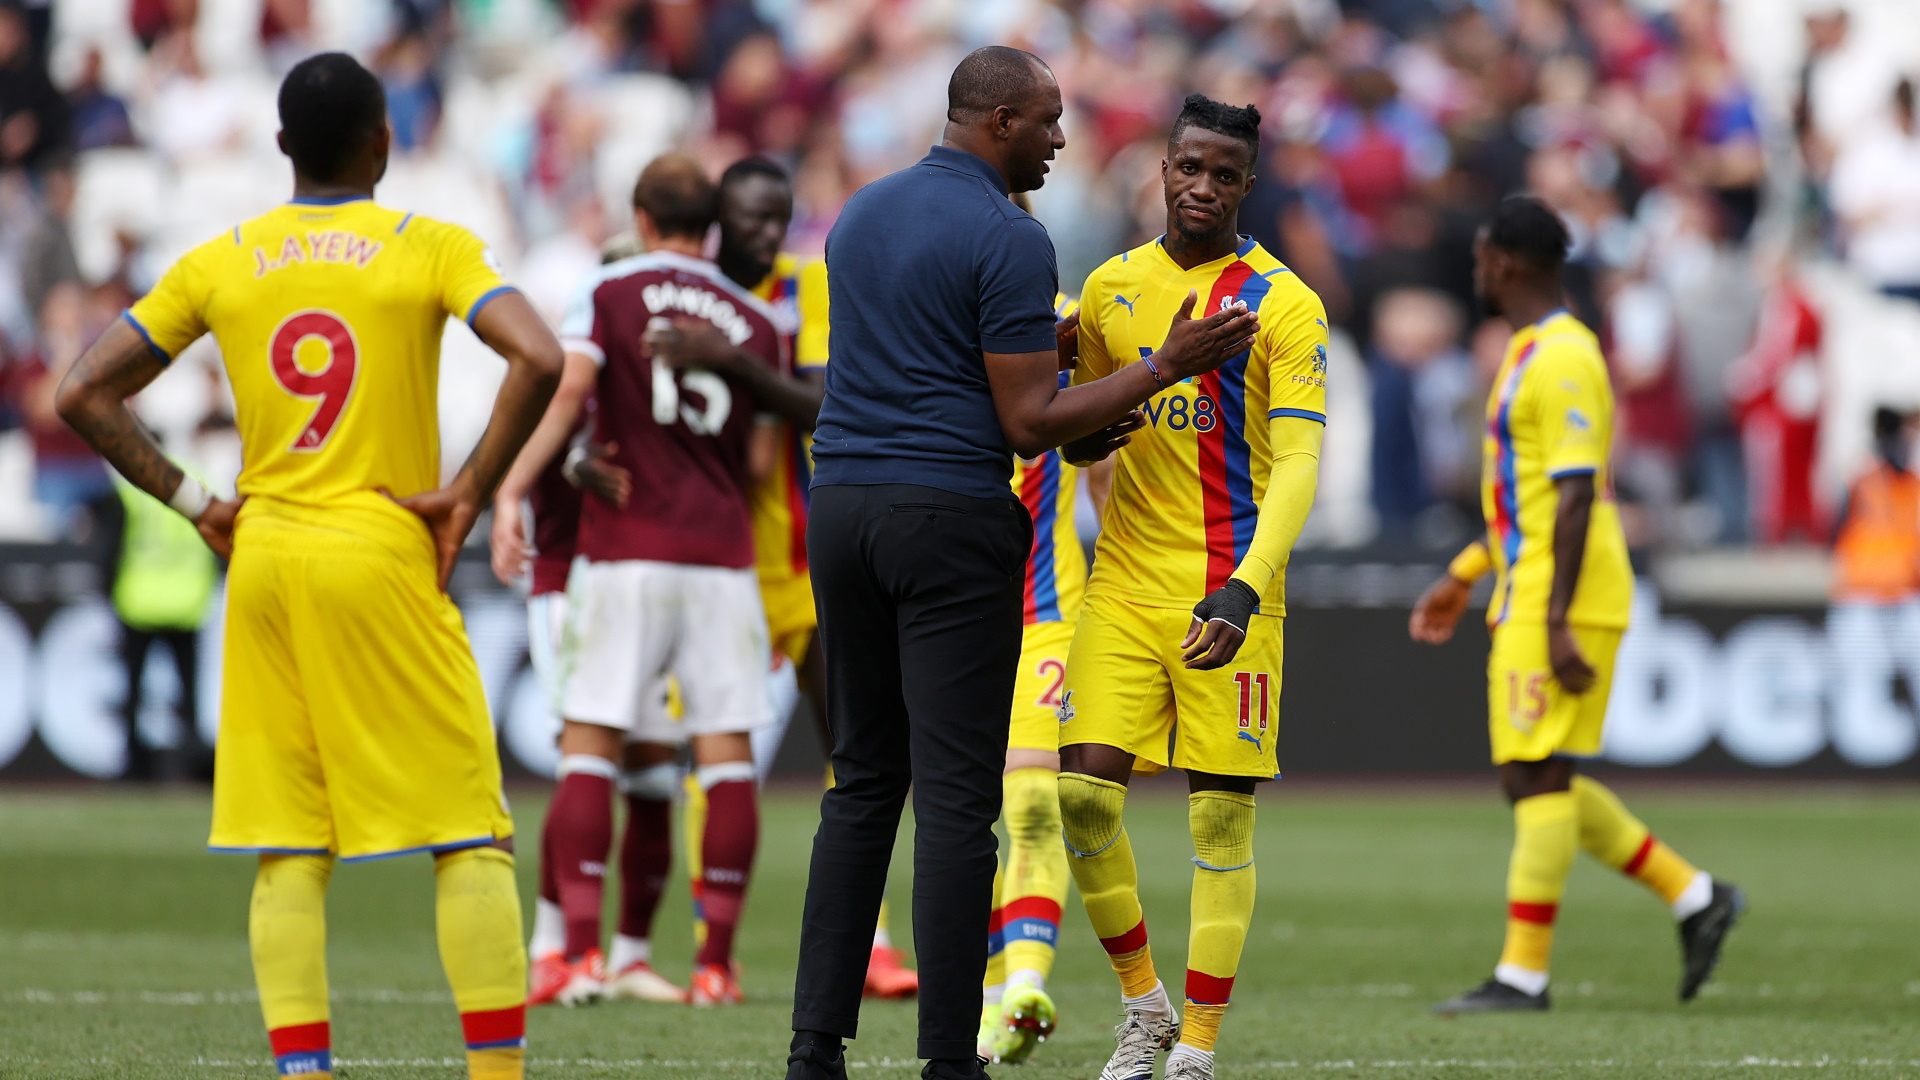 Crystal Palace are different, but Wilfried Zaha remains numero uno